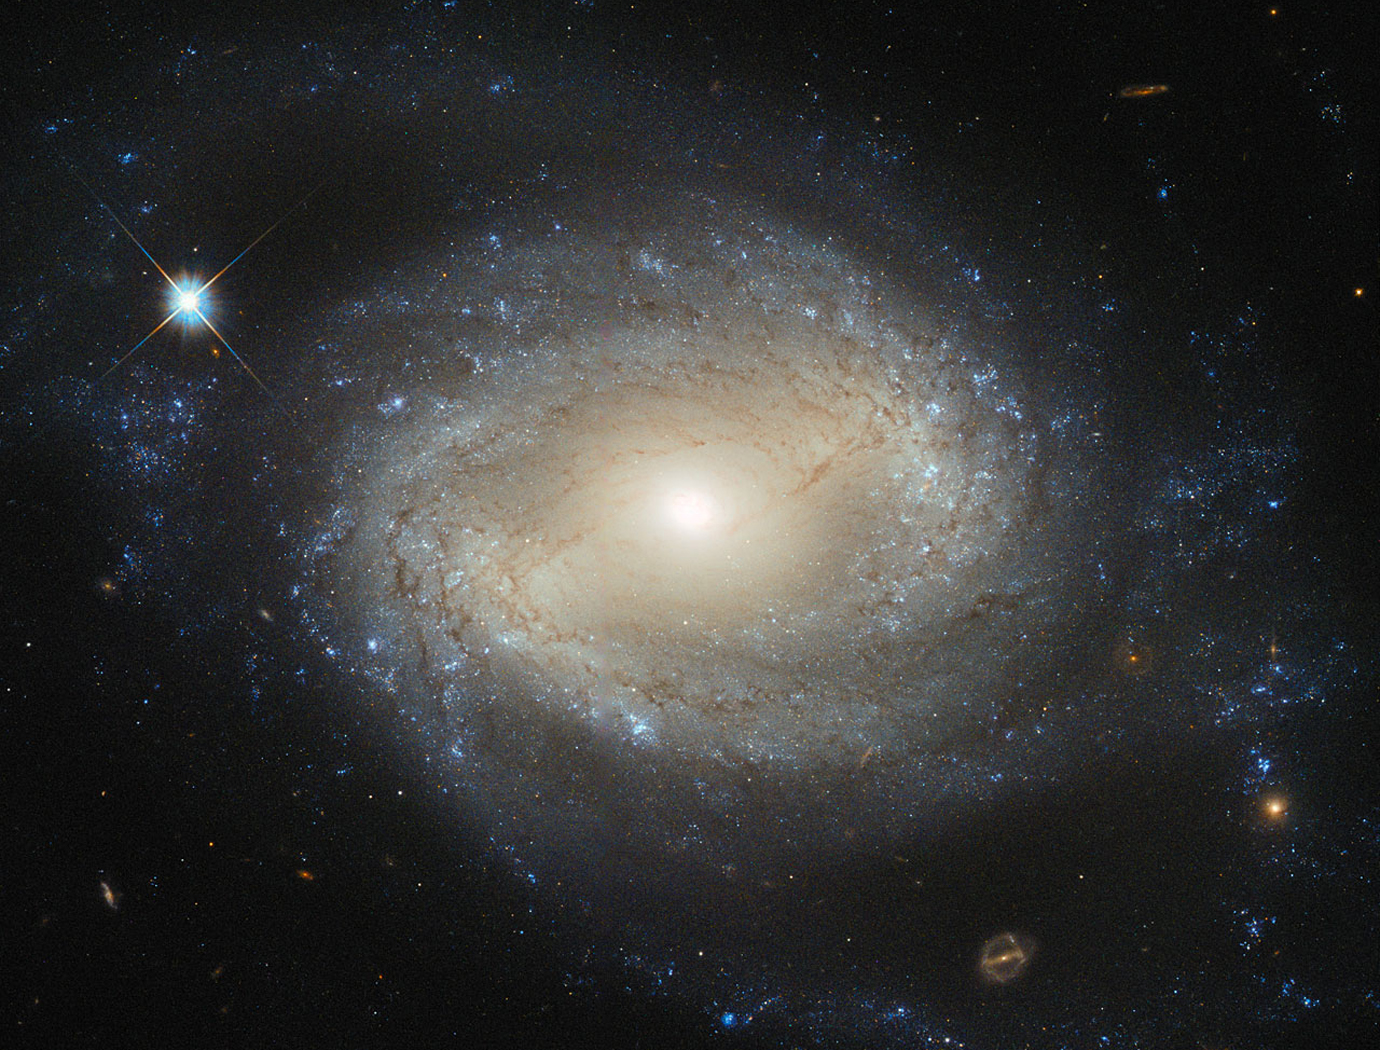 Hubble Sees Elegant Spiral Hiding a Hungry Monster; Image credit: ESA/Hubble & NASA